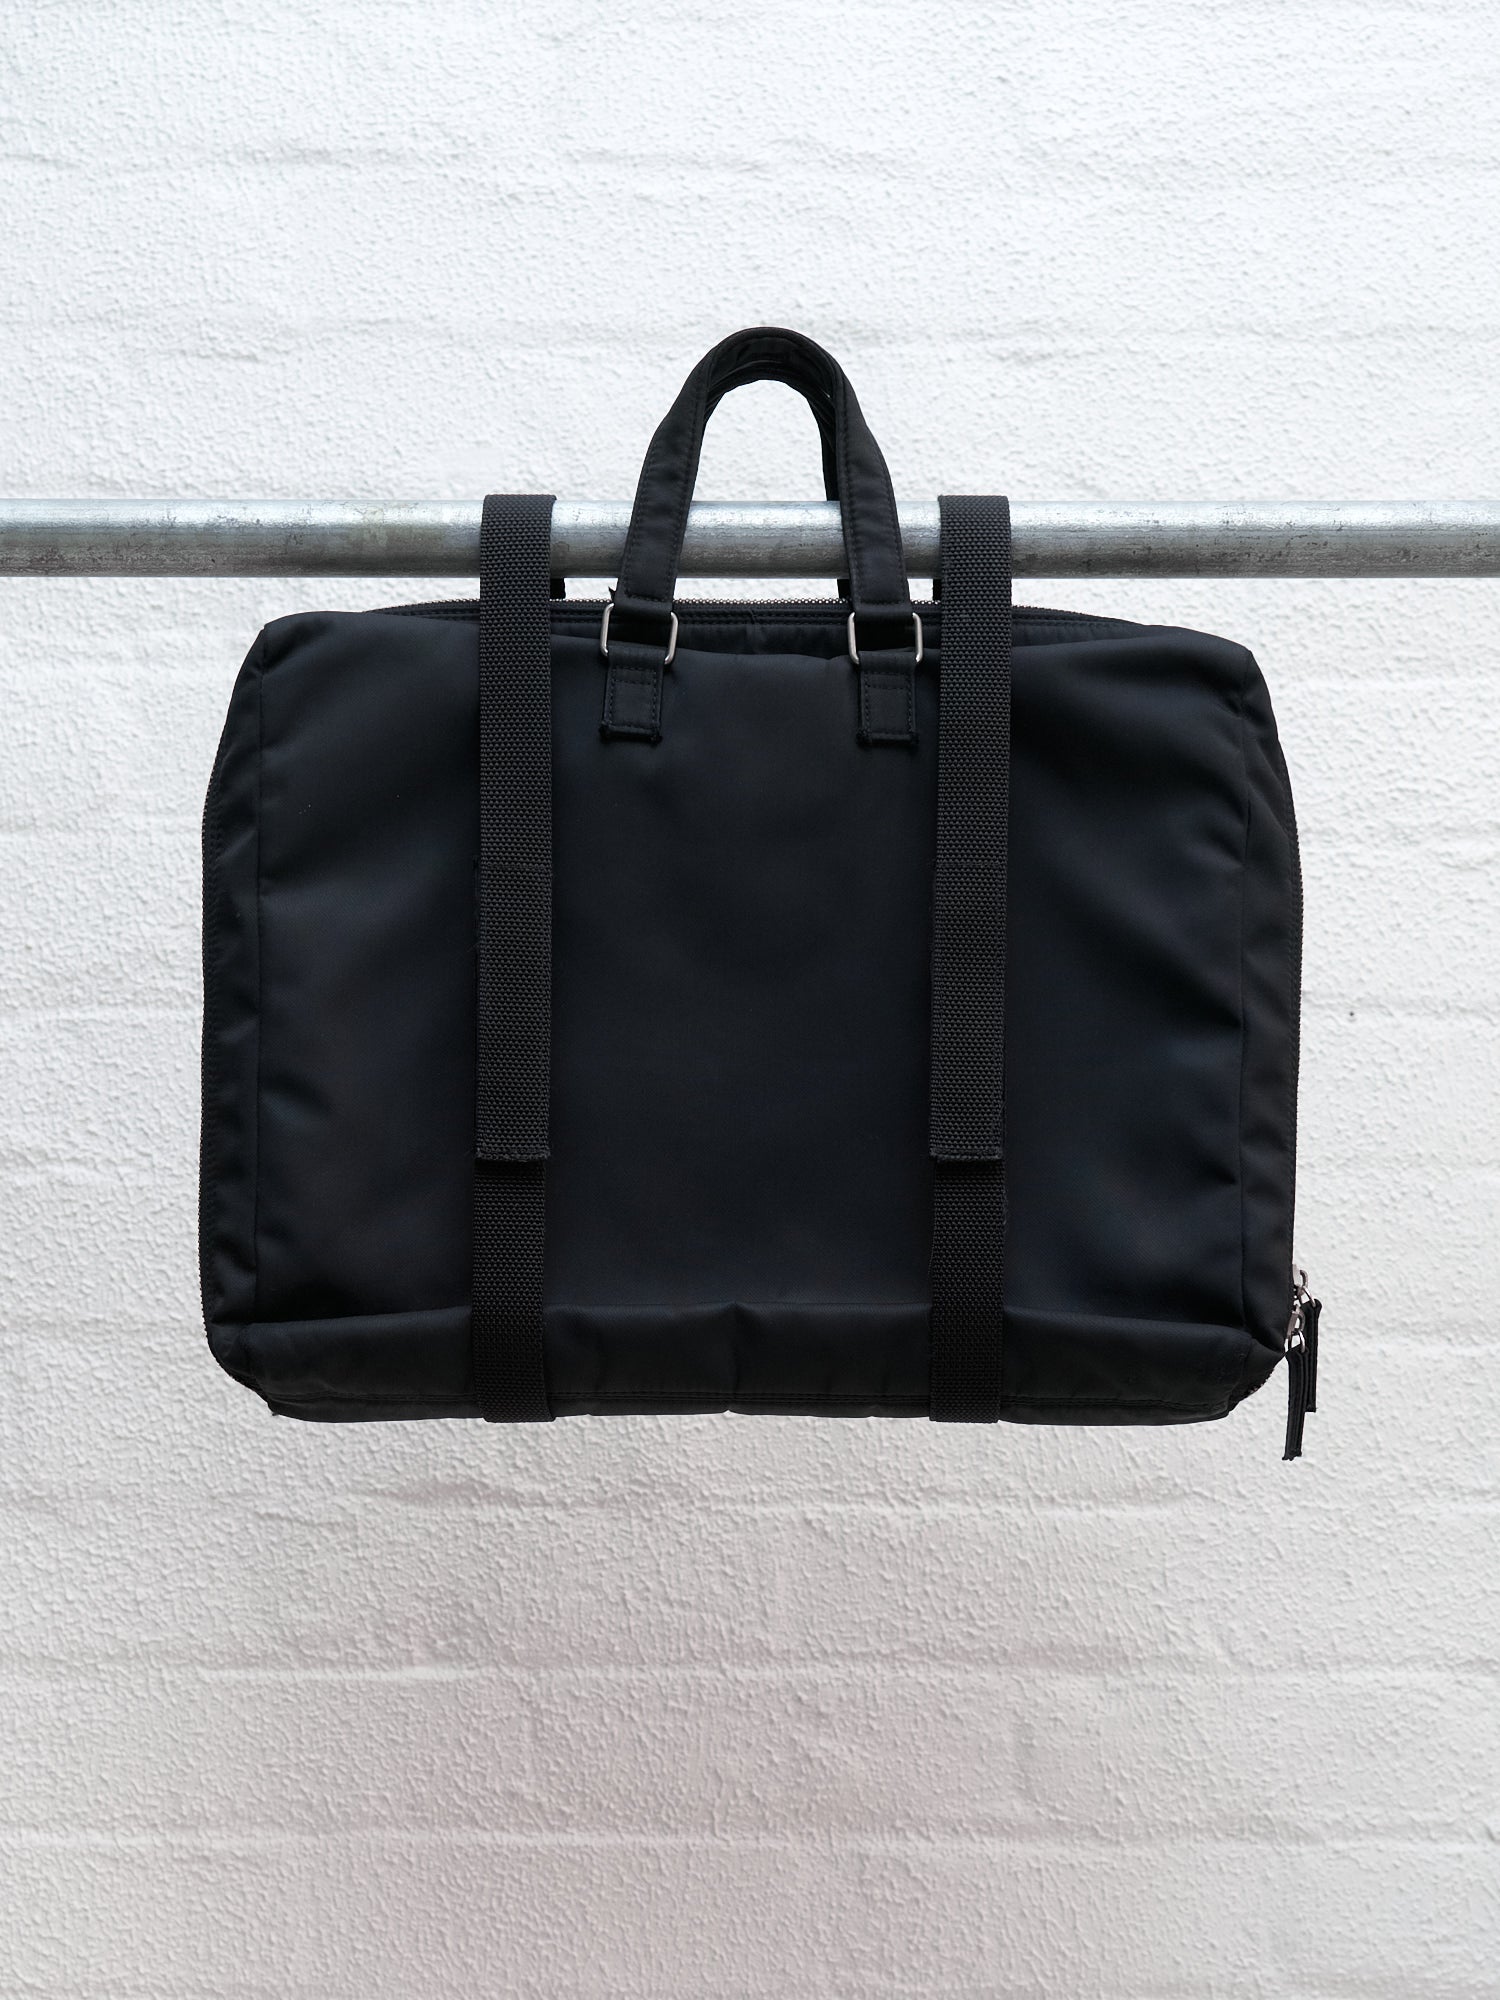 Helmut Lang 1990s-2000s black nylon two way briefcase backpack